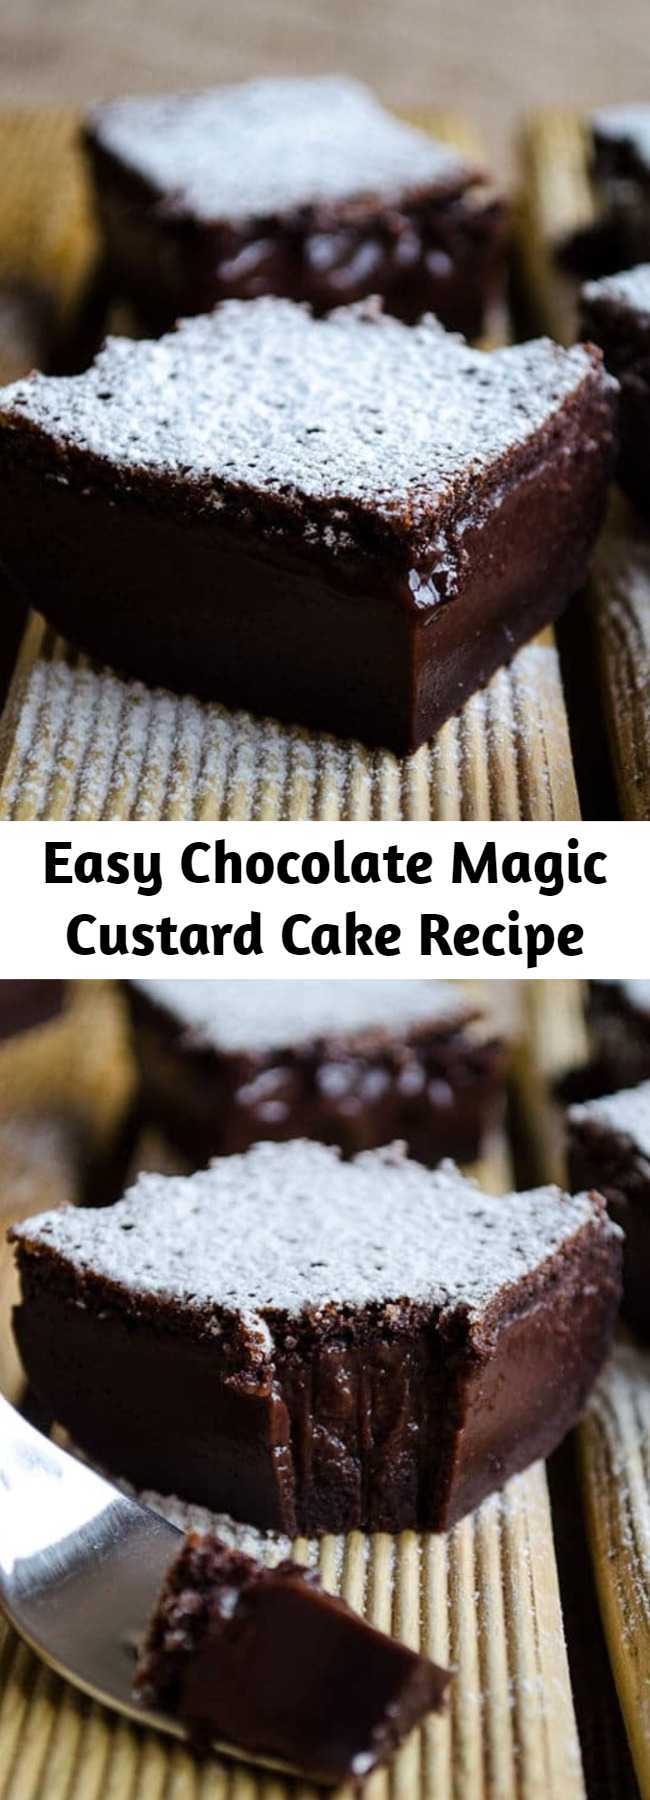 Easy Chocolate Magic Custard Cake Recipe - Chocolate Magic Custard Cake will blow your mind with its look and taste. One cake batter results in 3-layered cake. Don’t worry about the runny batter, it will bake up perfectly! #cake #chocolate #custard #dessert